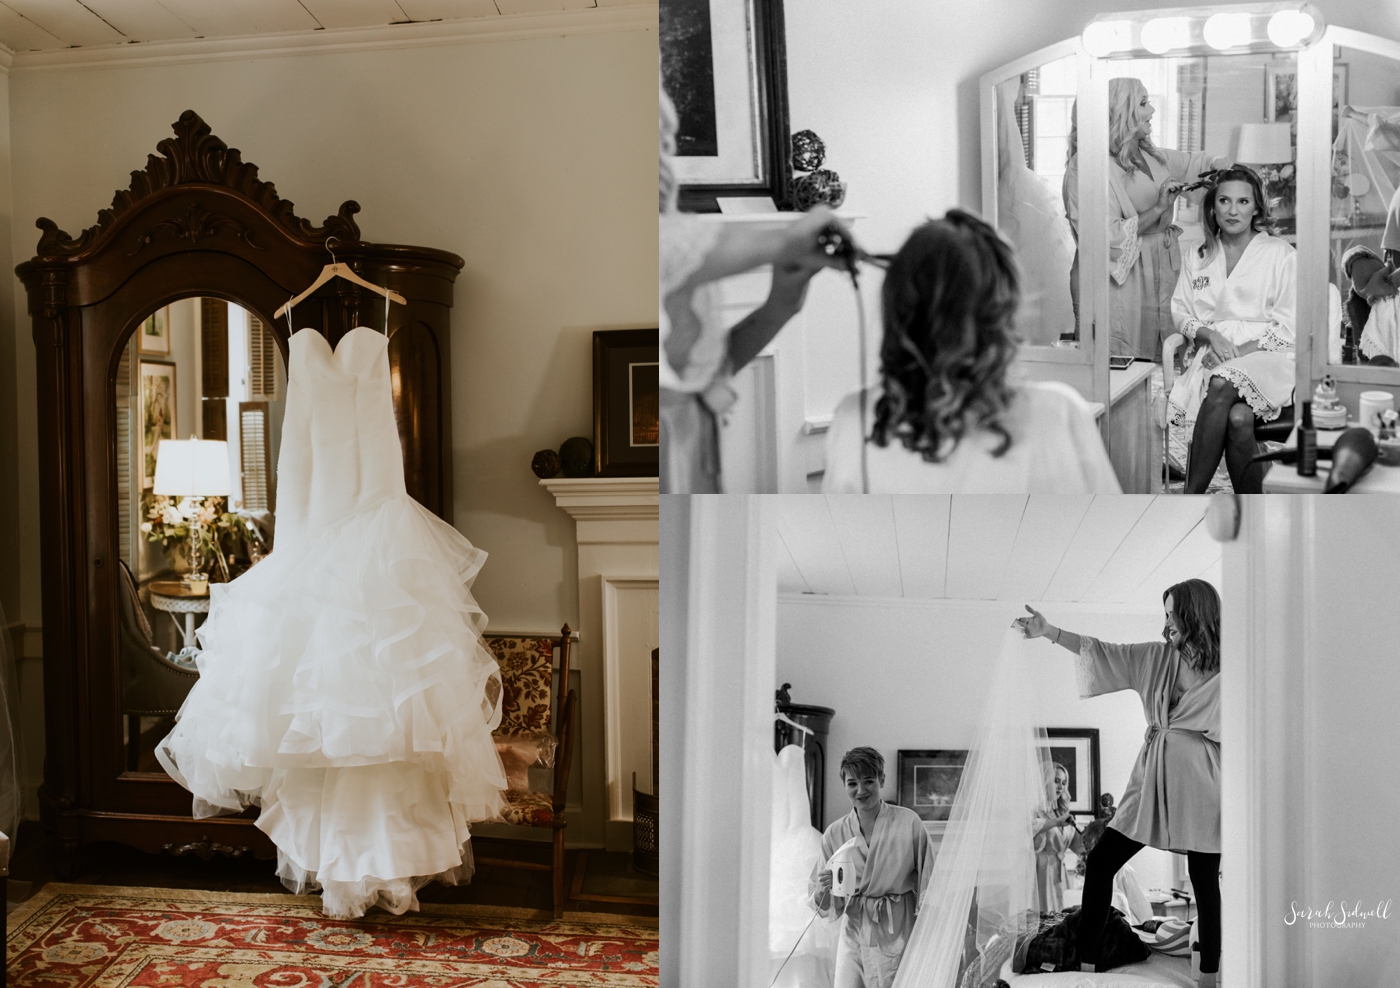 Wedding Pictures | Sarah Sidwell Photography